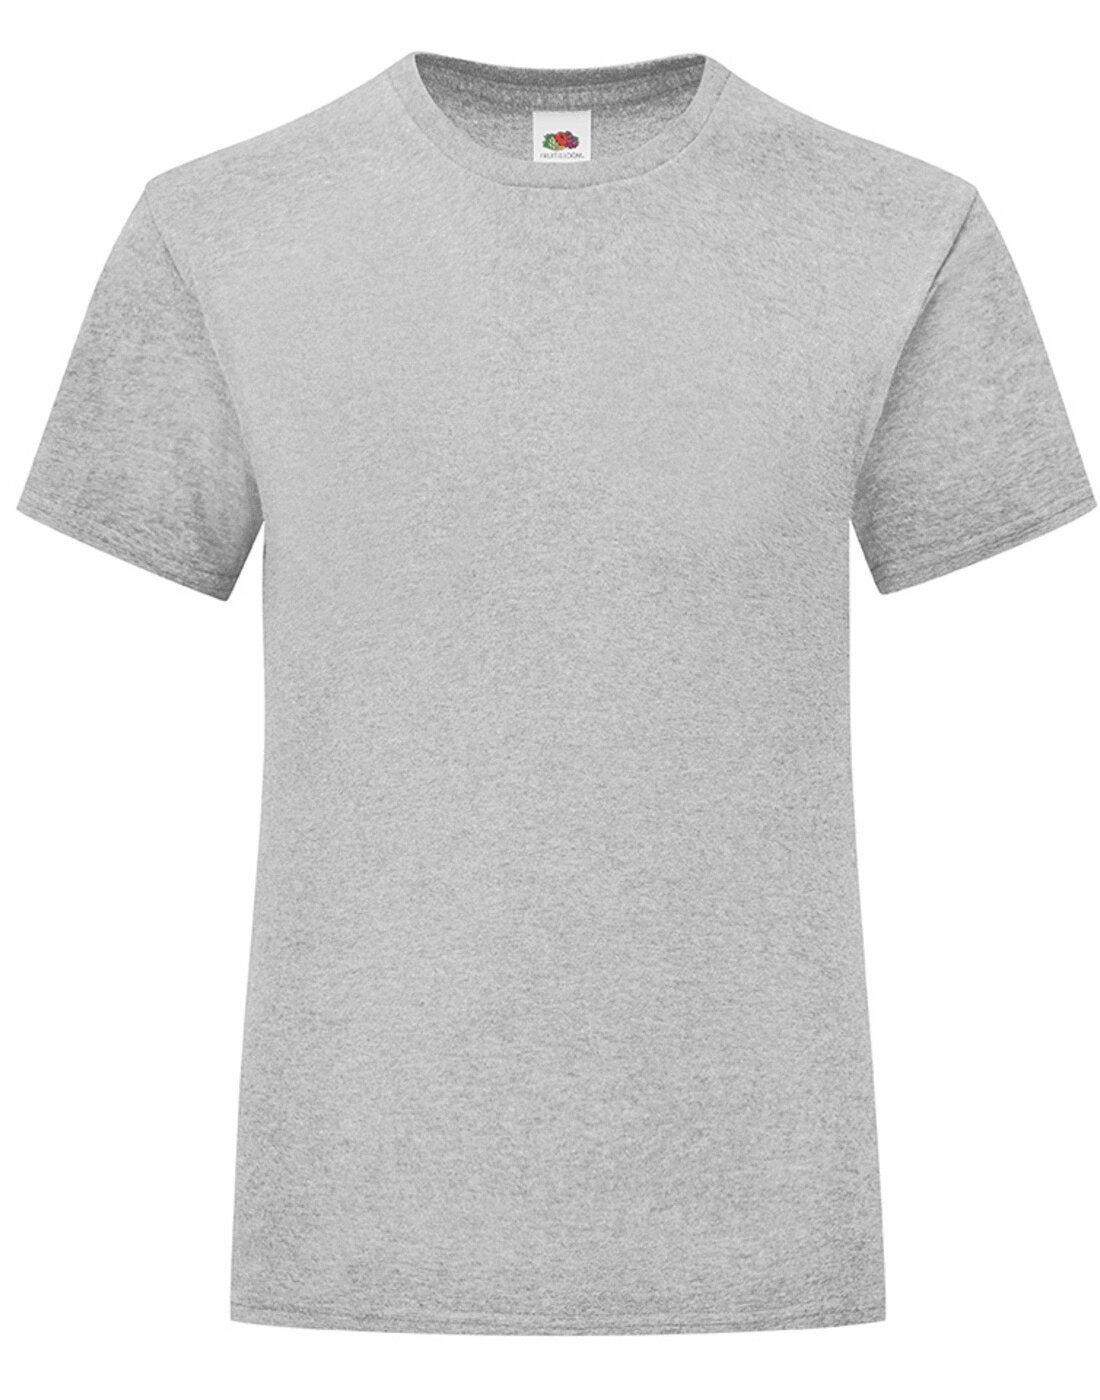 Fruit of the Loom Girls Iconic T - Heather Grey